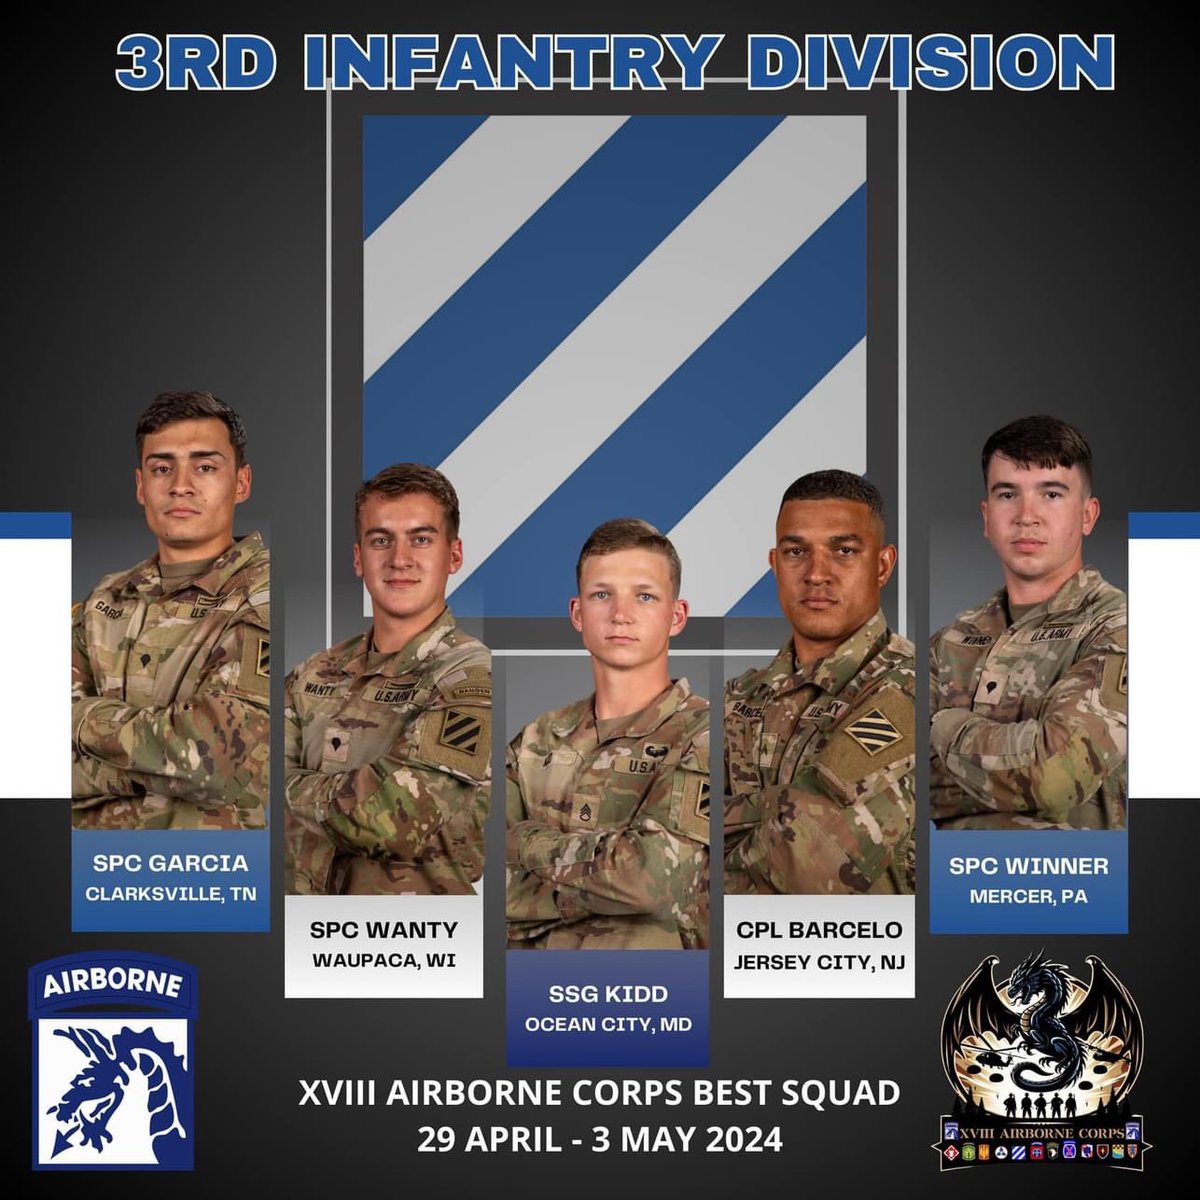 The XVIII ABC competition for Best Squad is well underway. Squads have battled through two days of events so far. Meet your 3rd ID squad and head over to the @18airbornecorps page to show your support for your Dogface Soldiers. ROTM! Not fancy, just tough.